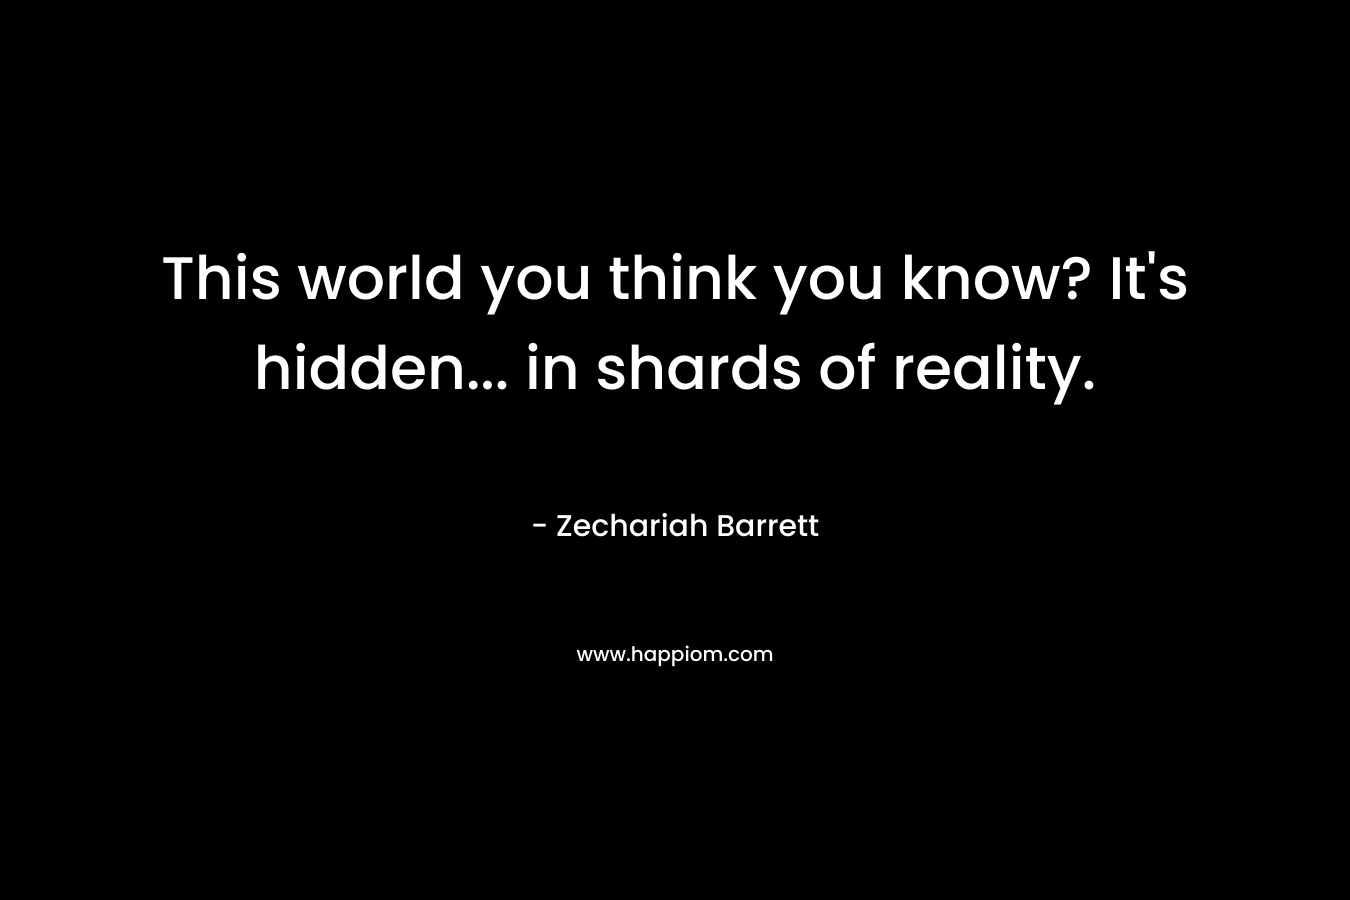 This world you think you know? It's hidden... in shards of reality.